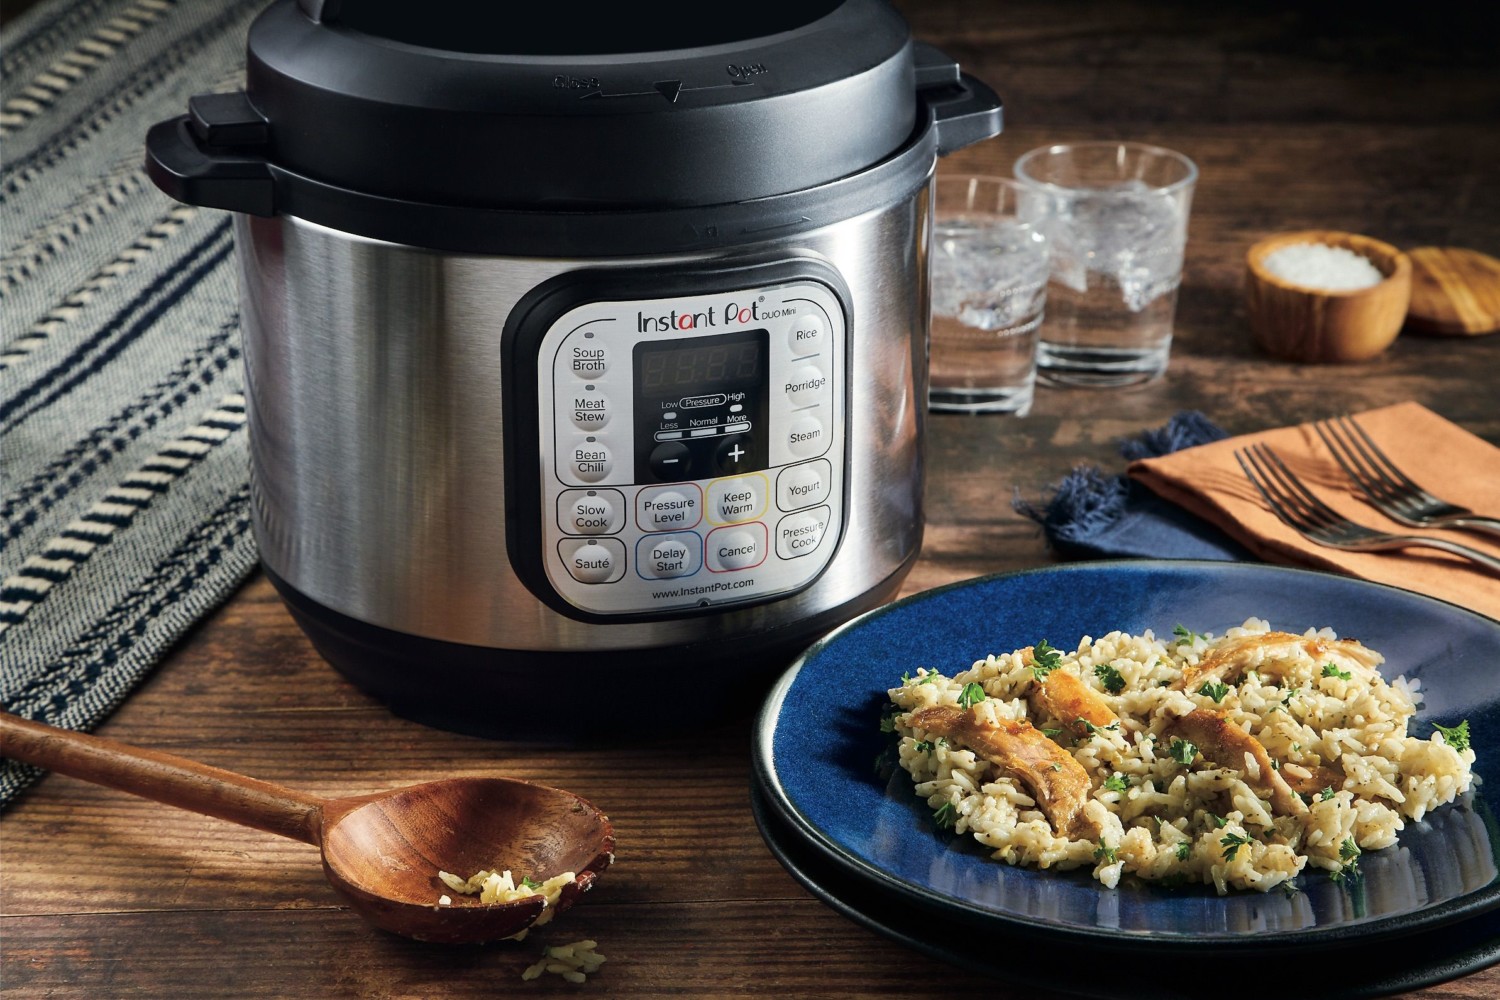 You can now buy Instant Pot meal kits that cook in 20 minutes